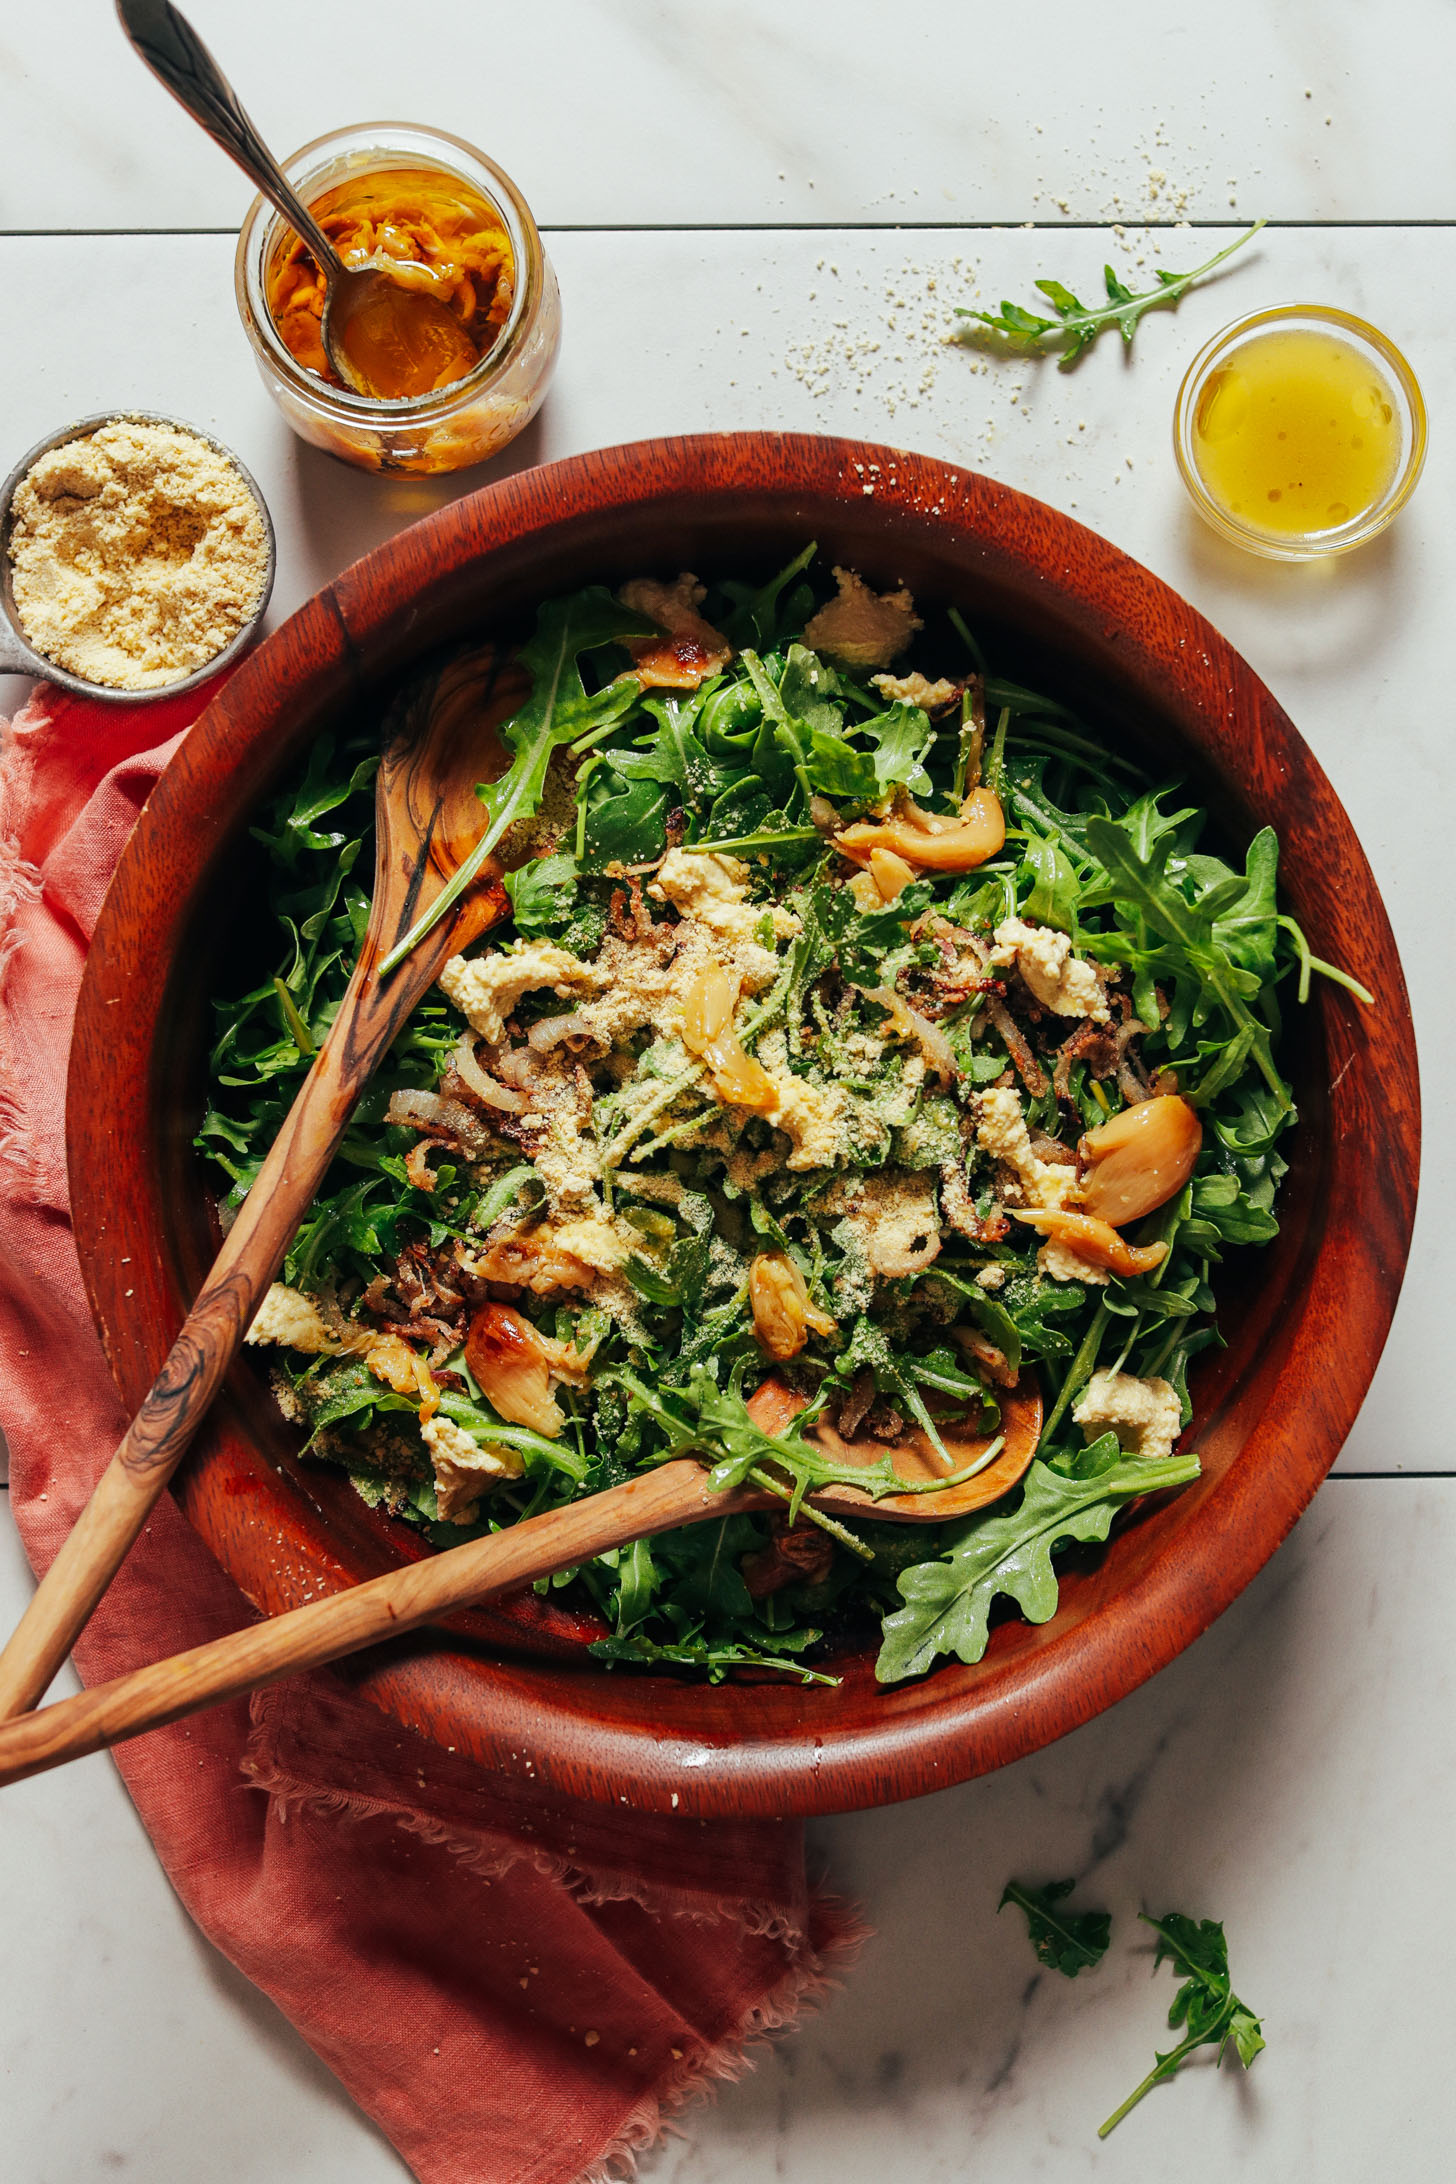 Big salad bowl filled with our Lemony Arugula Salad recipe surrounded by ingredients used to make it